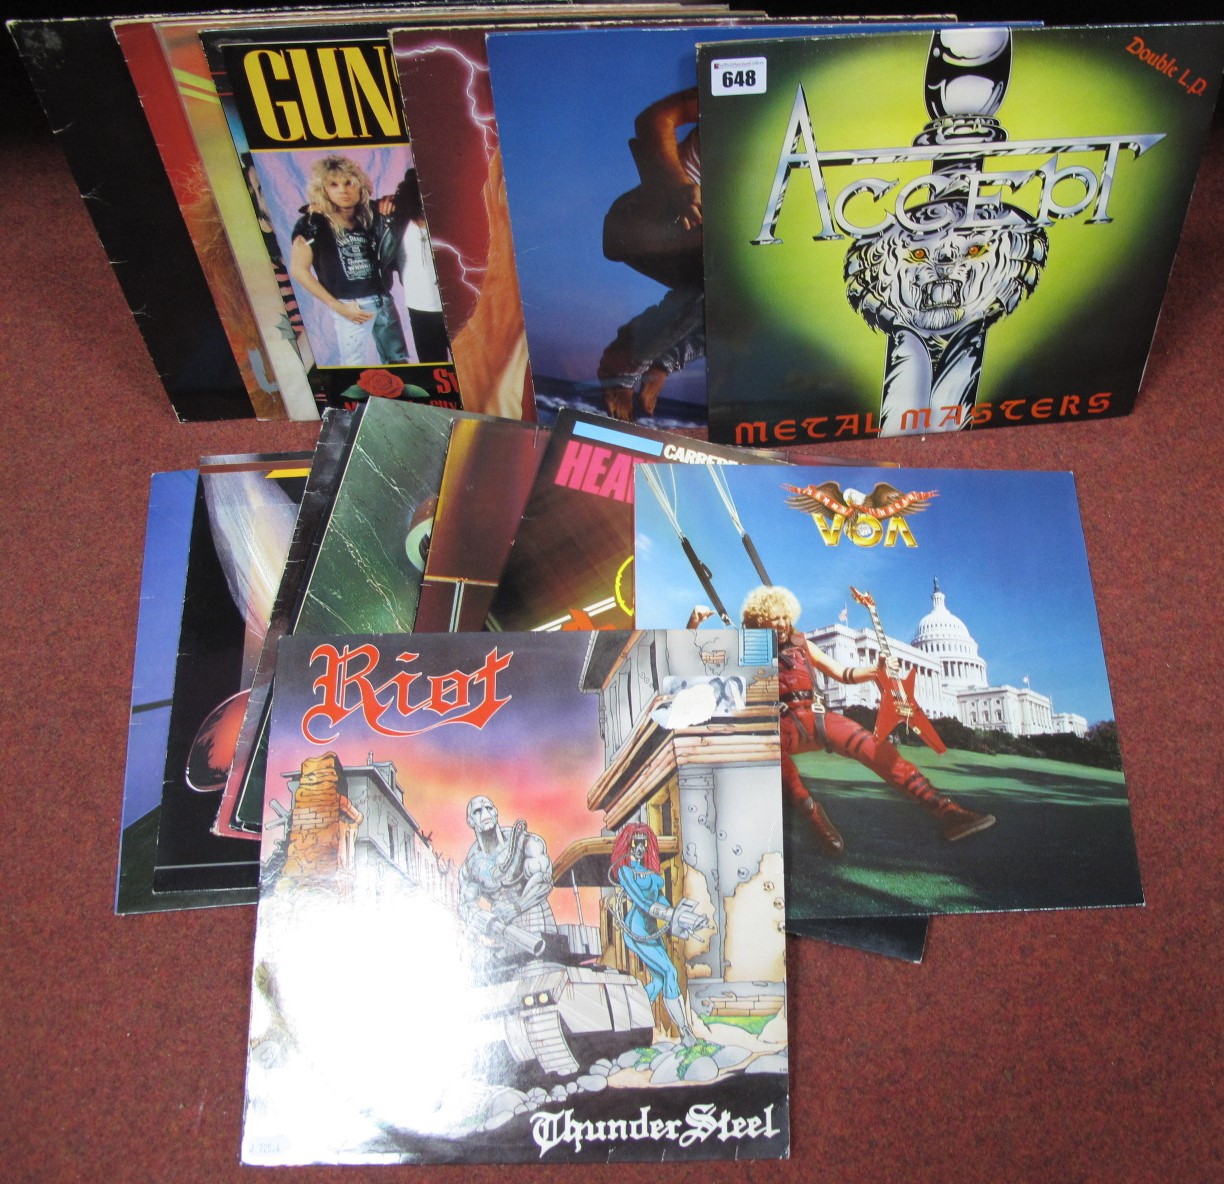 US/UK Metal and Rock - 'Metal For Muthas', Riot, Girl, Guns n' Roses, Force, Hot Spikes, Ramones,